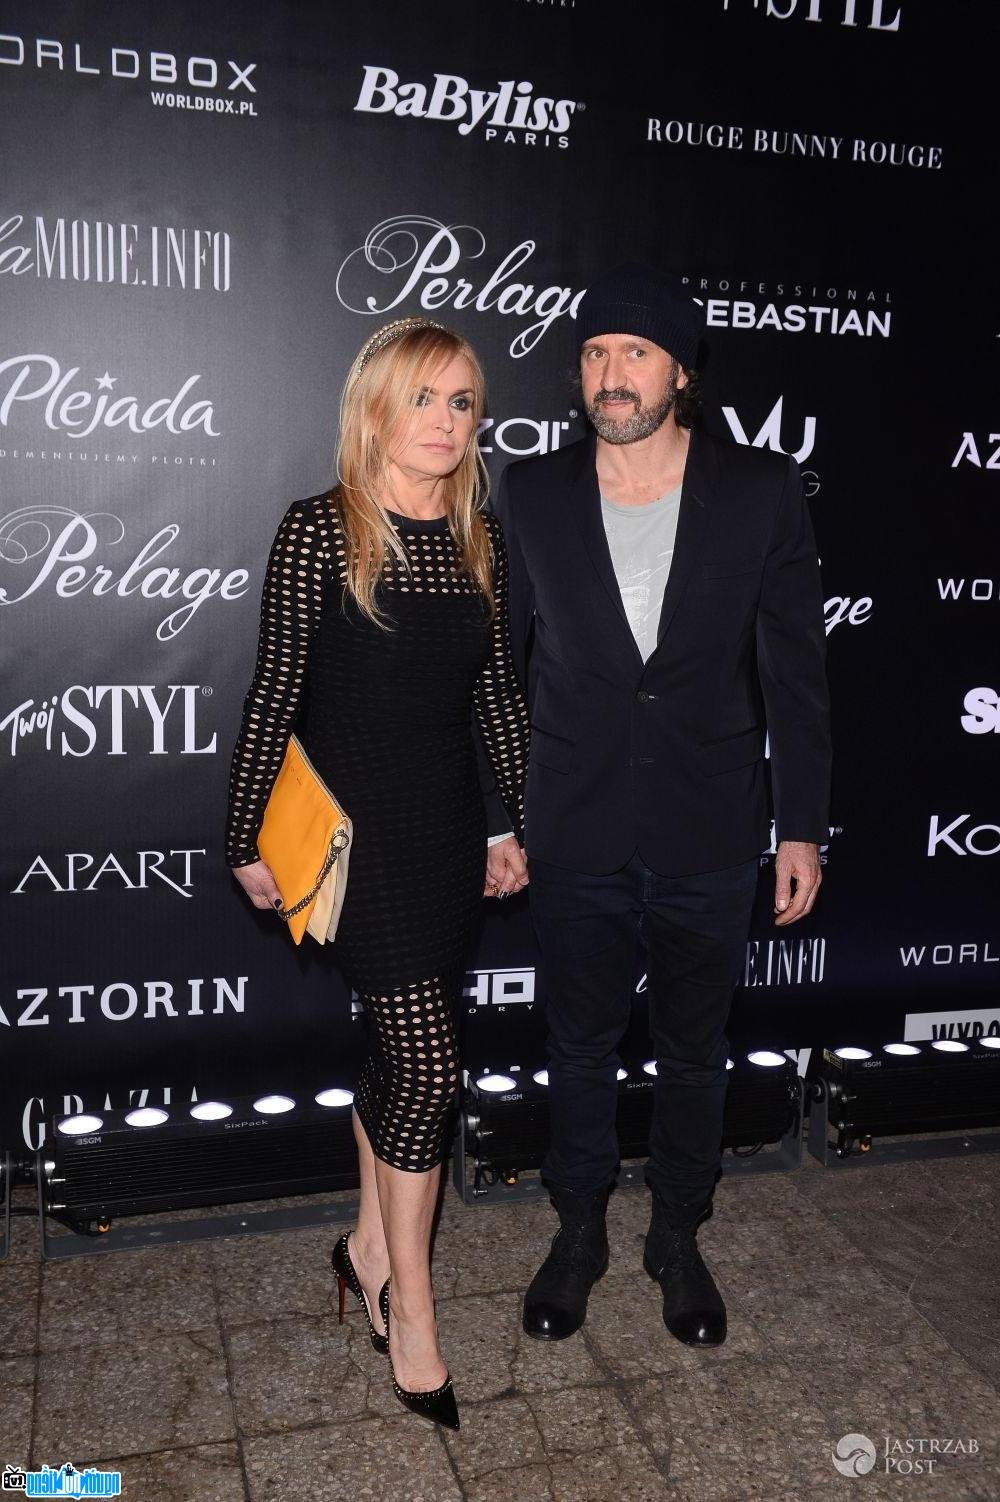 Journalist Monika Olejnil appeared with her boyfriend at an event